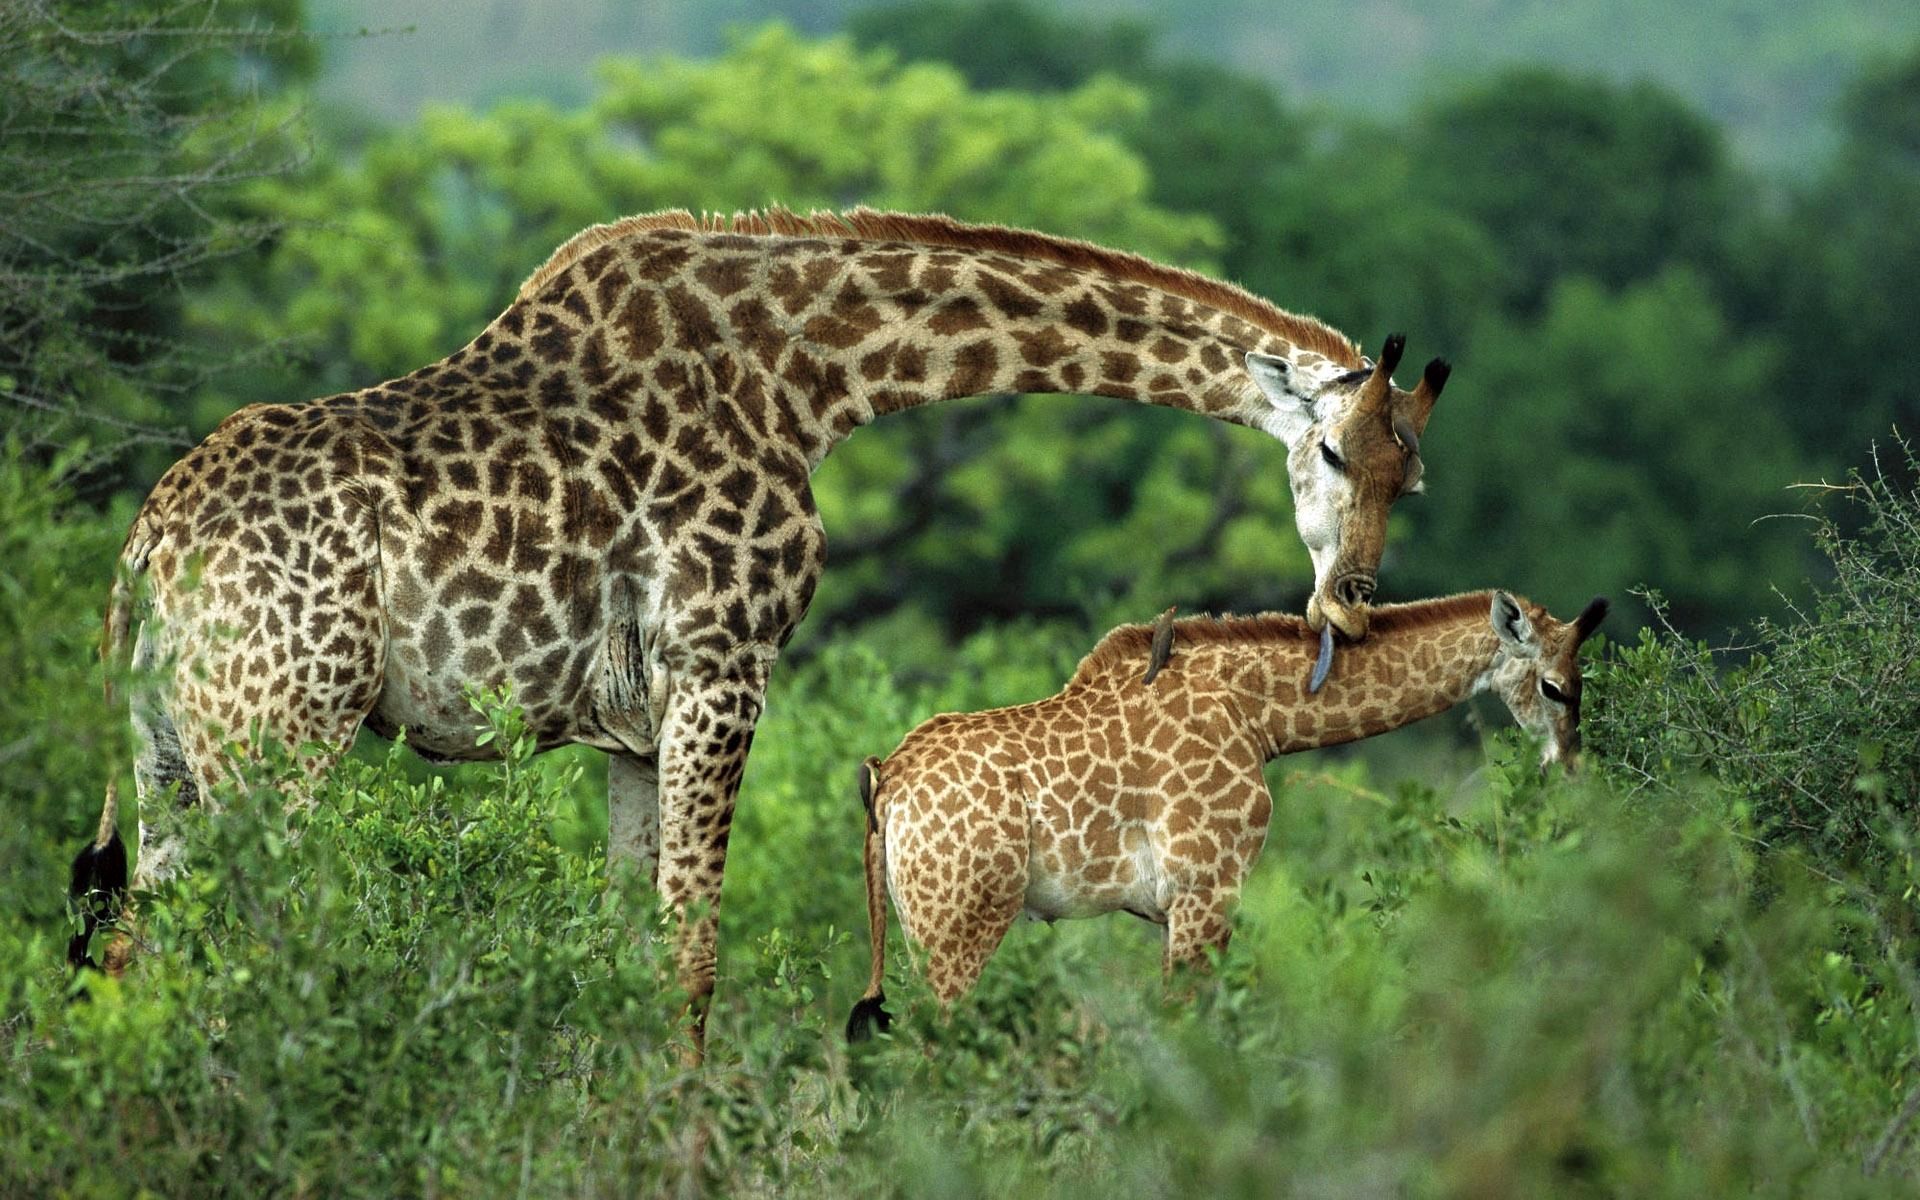 animals, grass, giraffes, young, couple, pair, stroll, care, joey